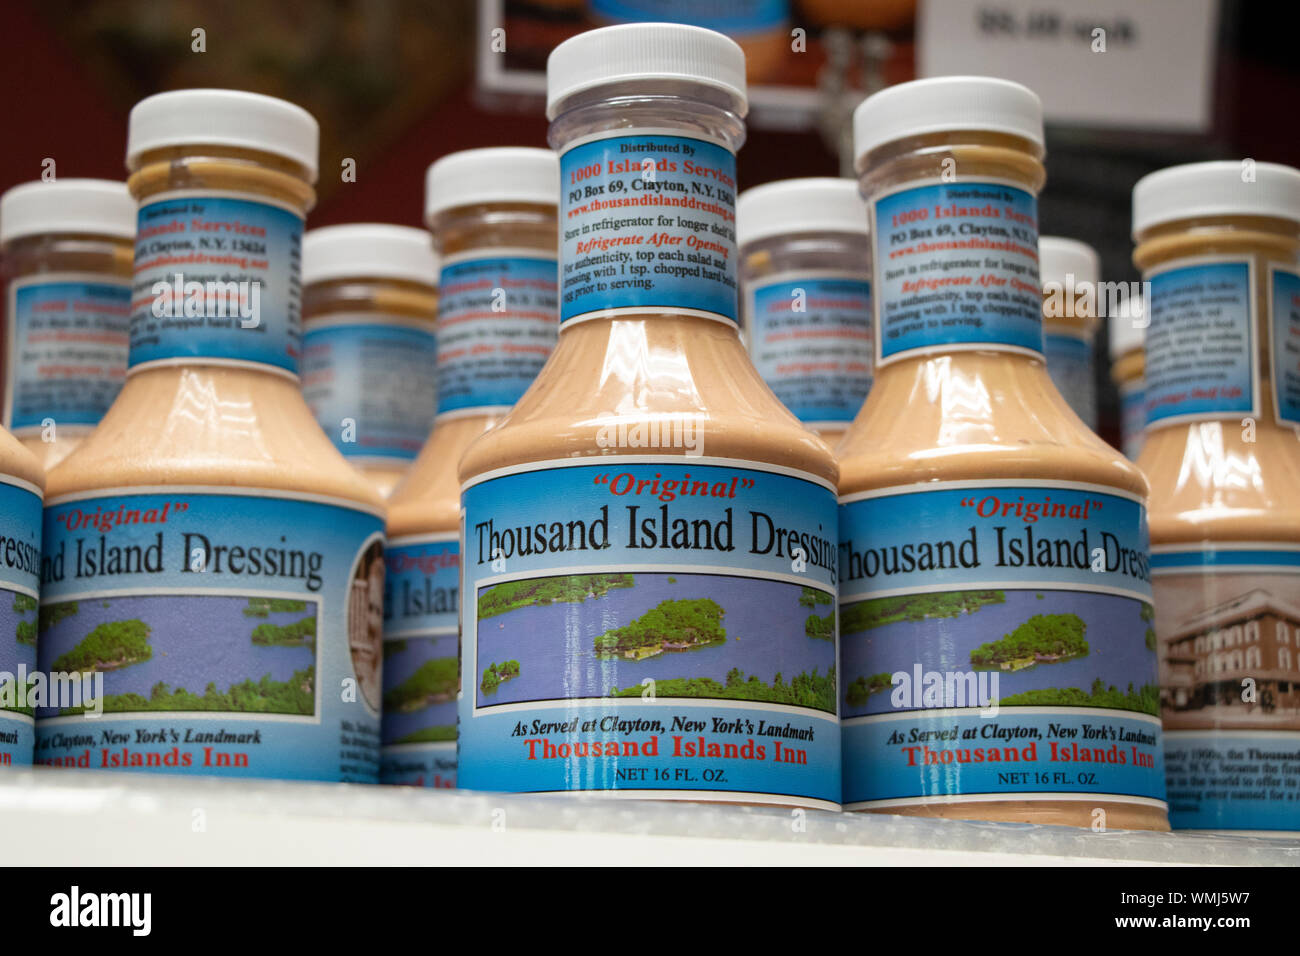 Clayton, New York, USA  - July 26, 2019 : Display of The 'Original' Thousand Island Salad Dressing Bottles at 1000 Islands River Rat Cheese Store Stock Photo